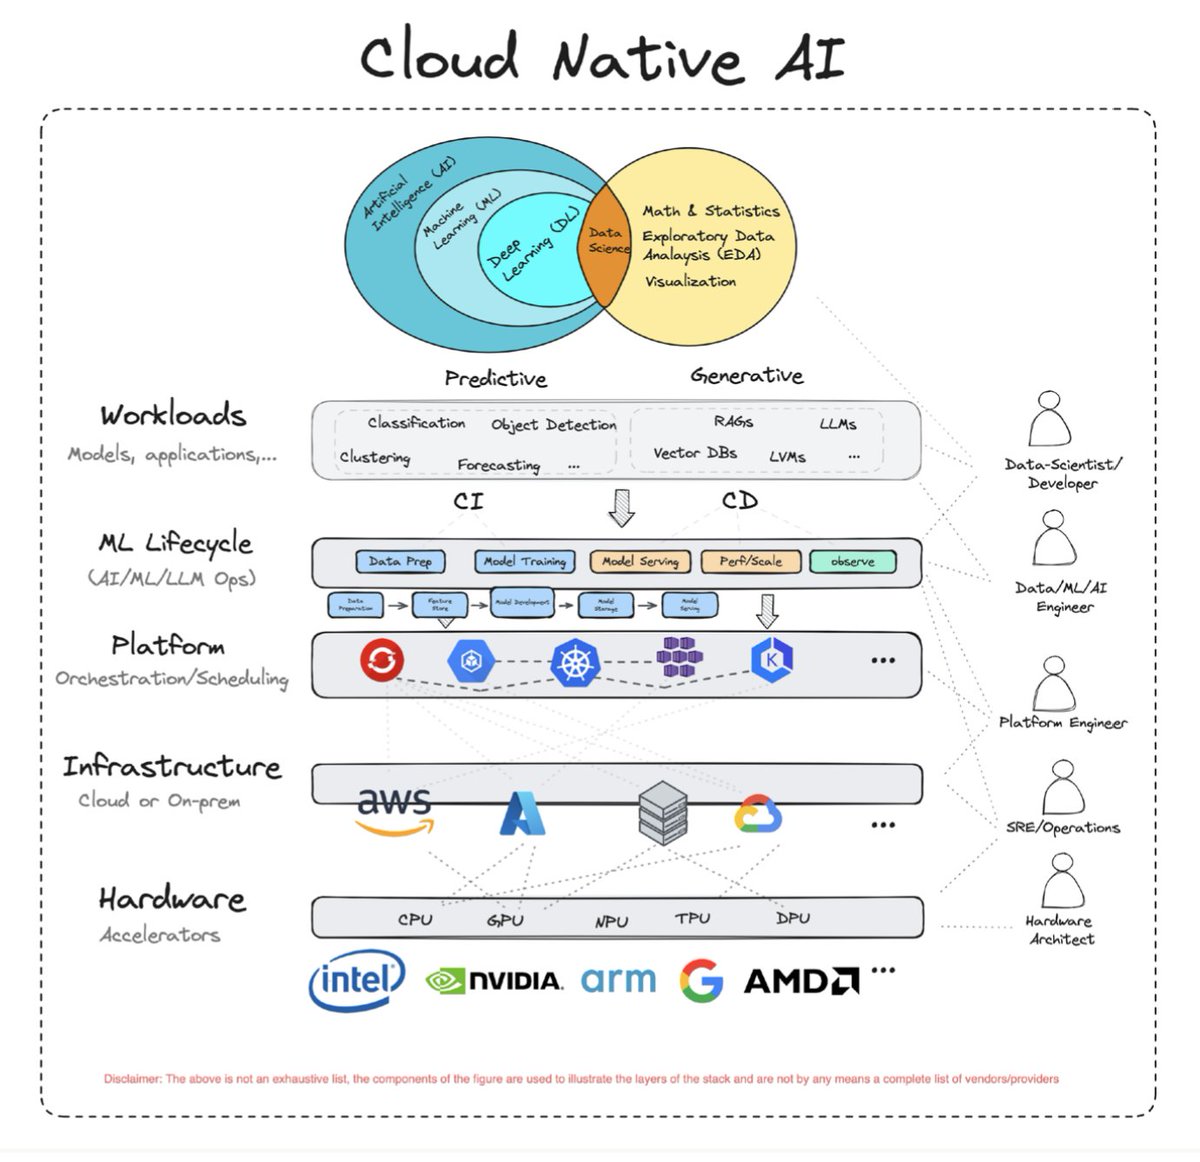 Cloud Native Artificial Intelligence Whitepaper - Enabling Gen AI Development with Opensource and Cloud-native 👇 cncf.io/reports/cloud-…